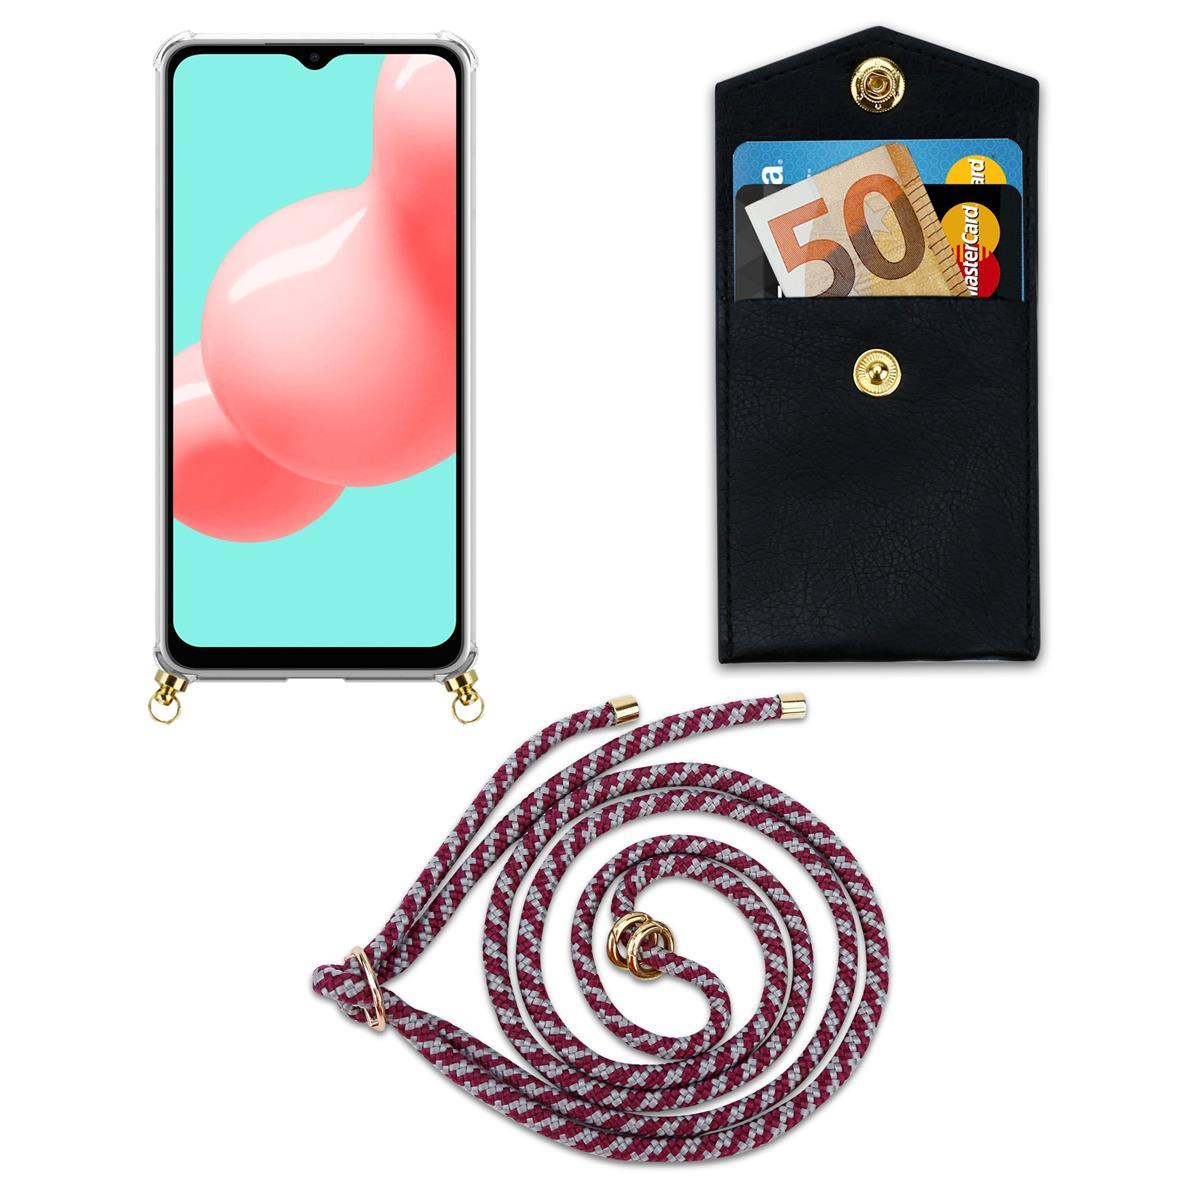 und Hülle, Kordel A32 Galaxy mit Band Kette ROT WEIß Ringen, Gold CADORABO Backcover, Samsung, 4G, abnehmbarer Handy